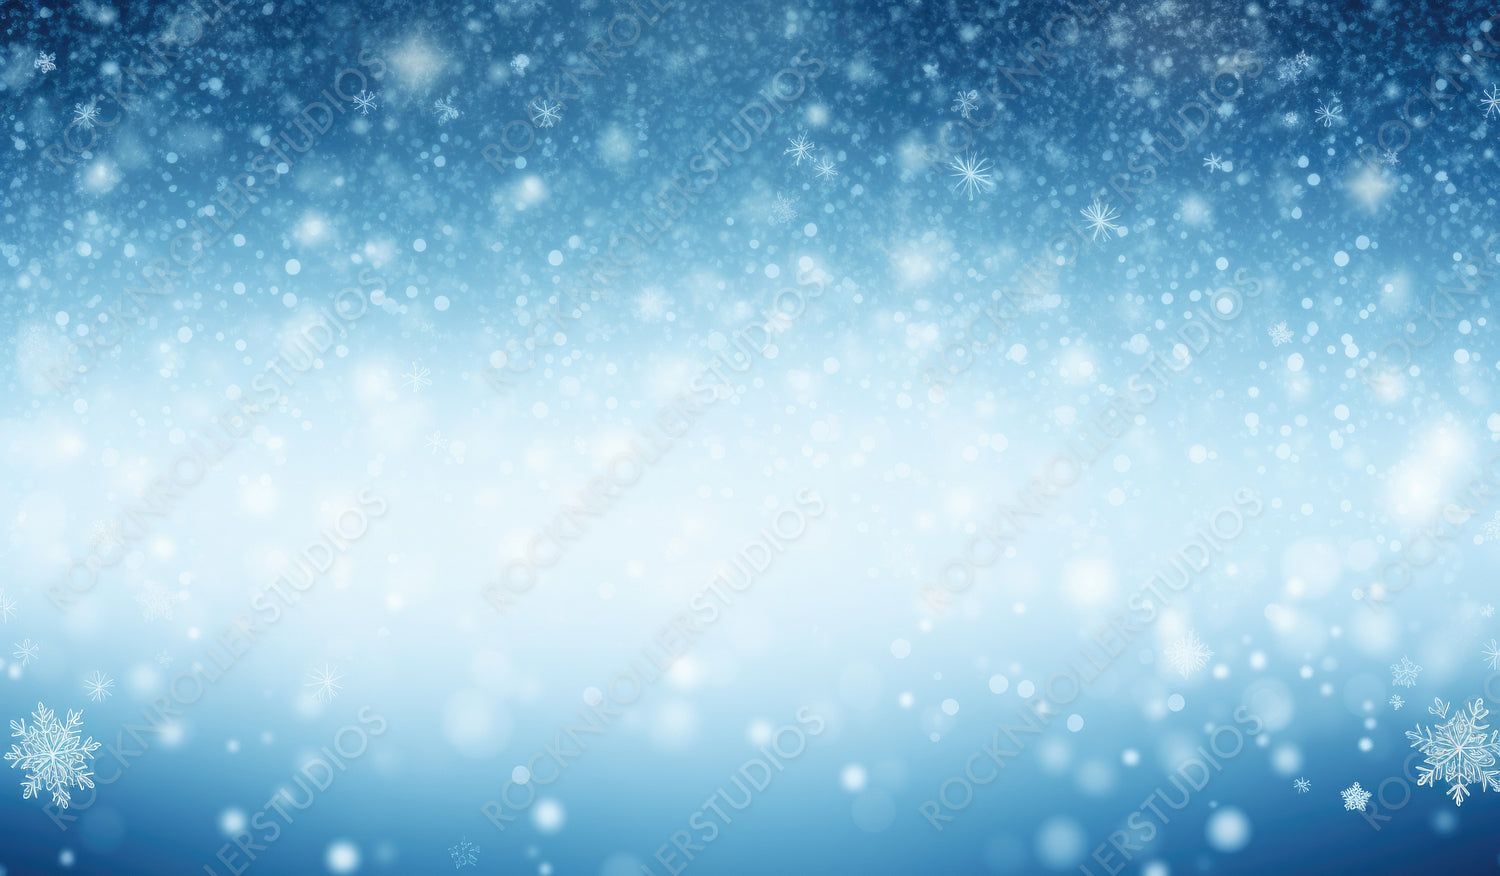 Christmas Blue Background with Snow.